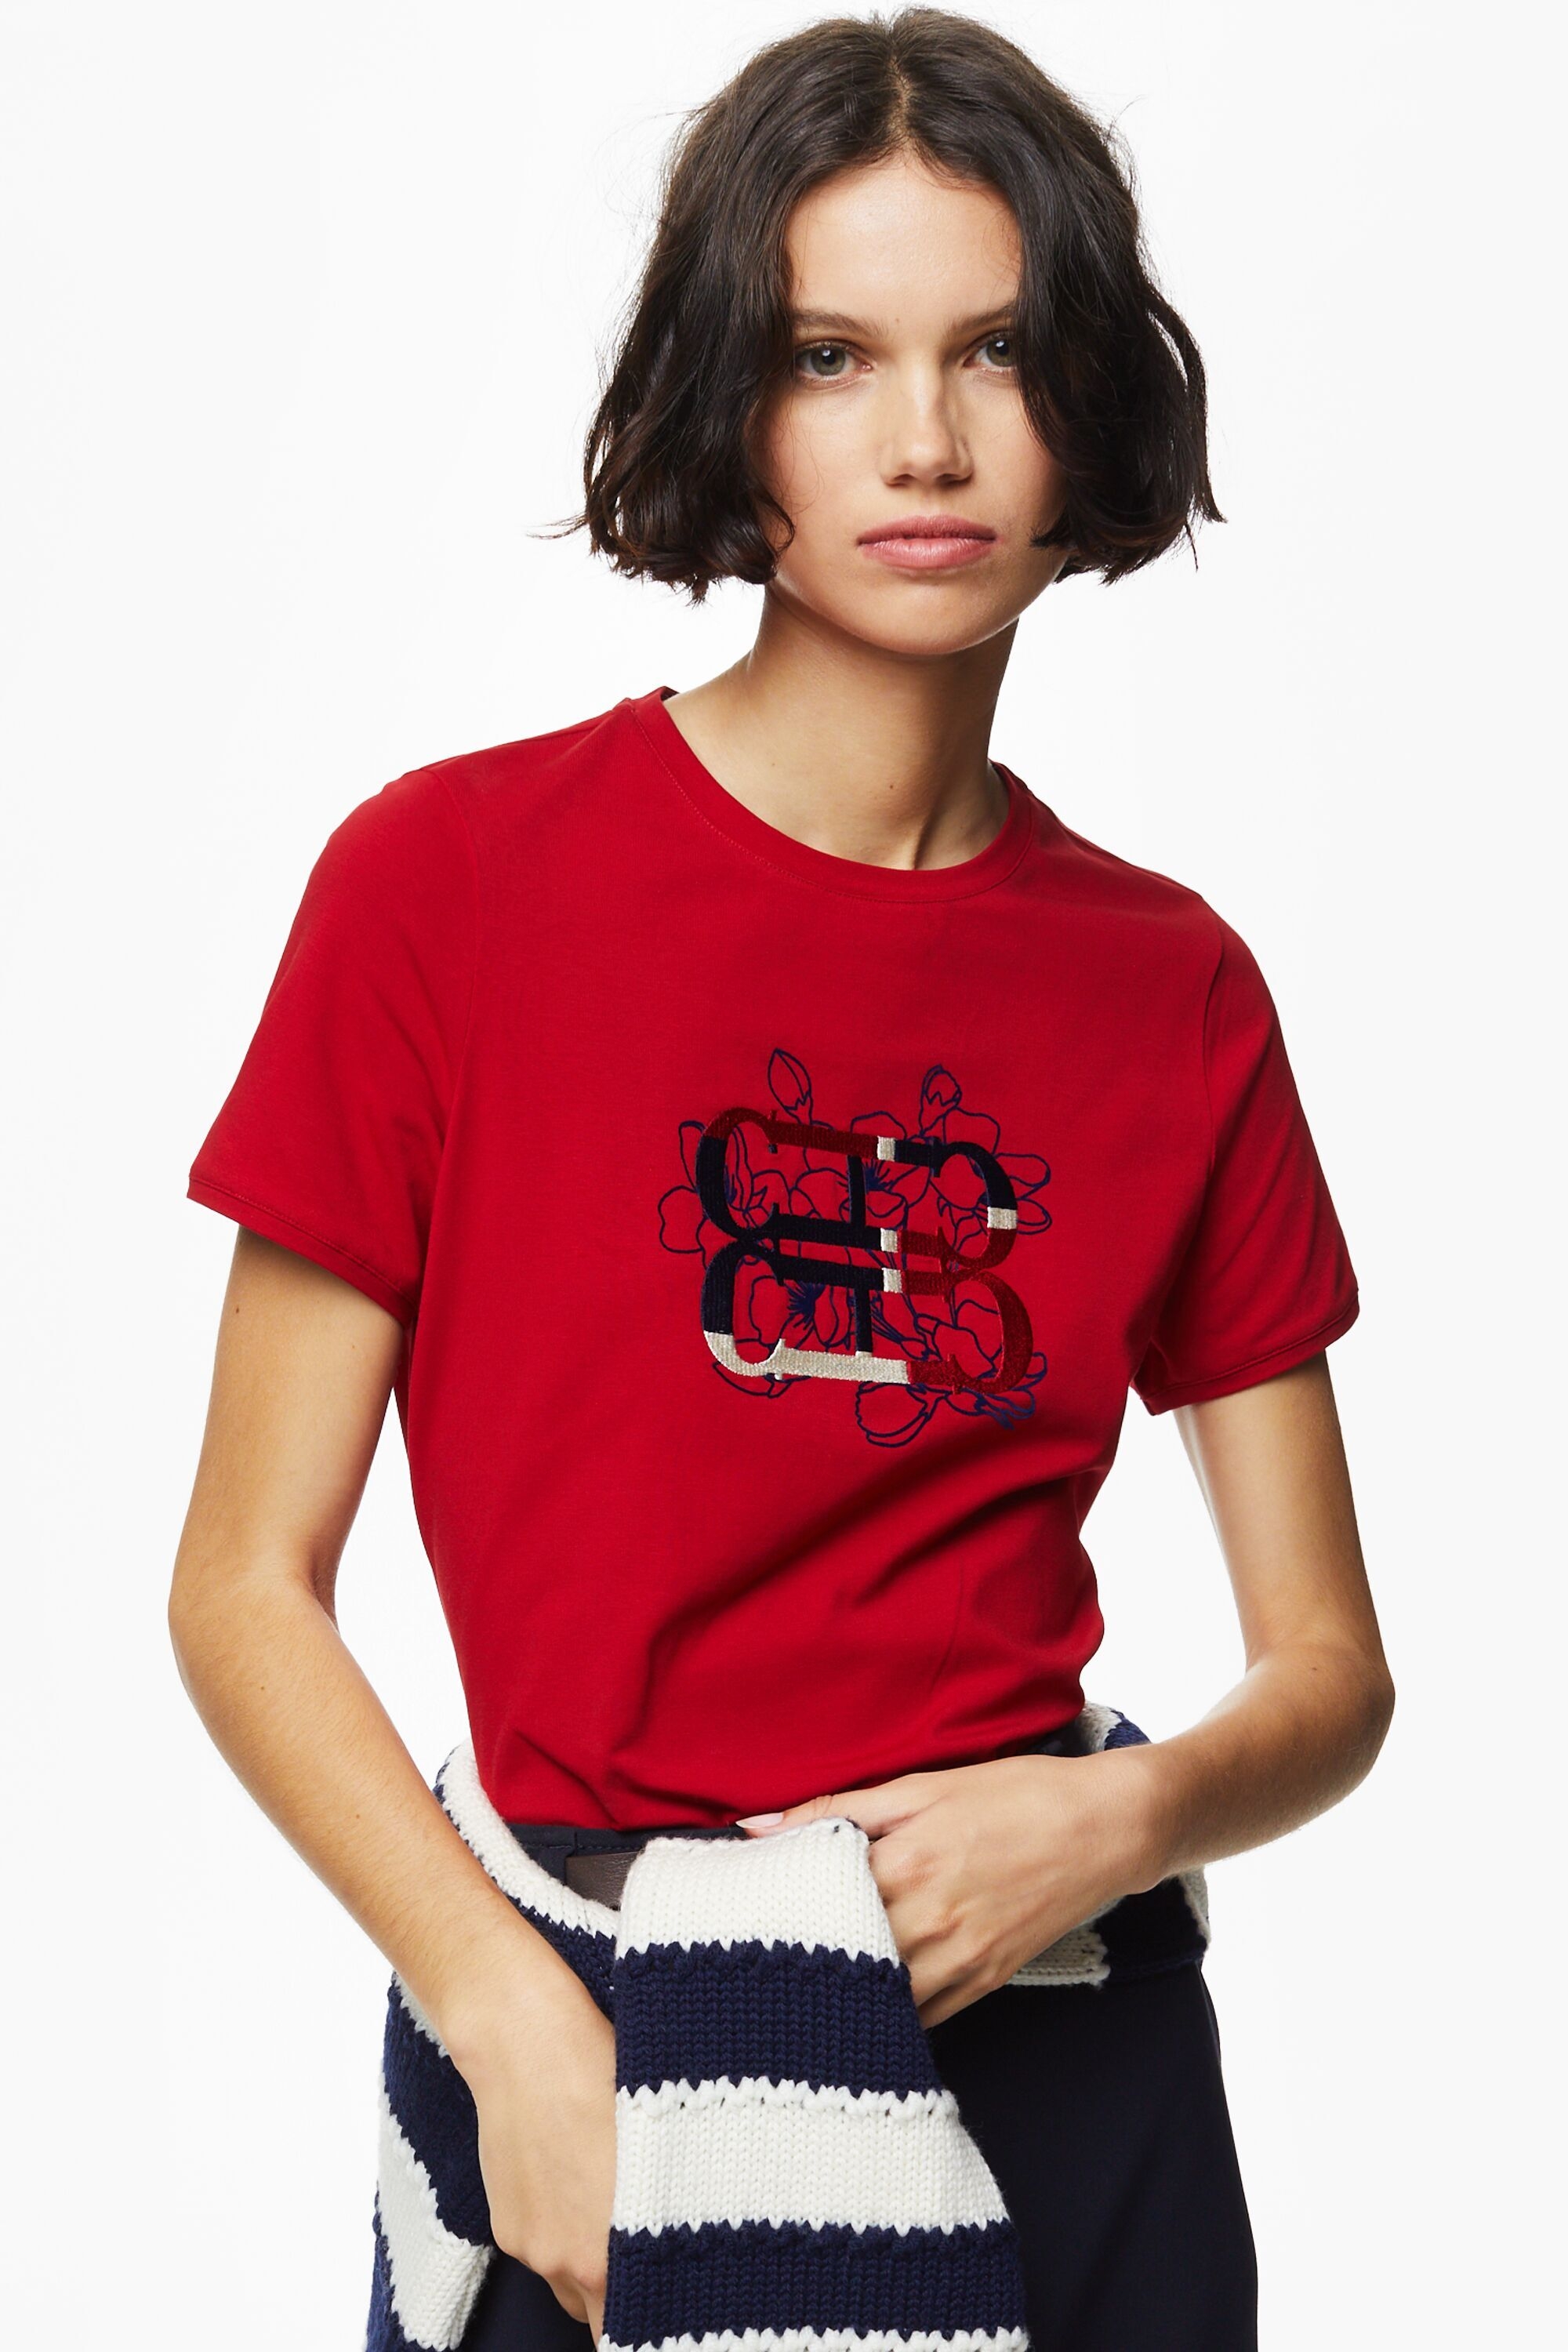 Initials Insignia embroidered T-shirt